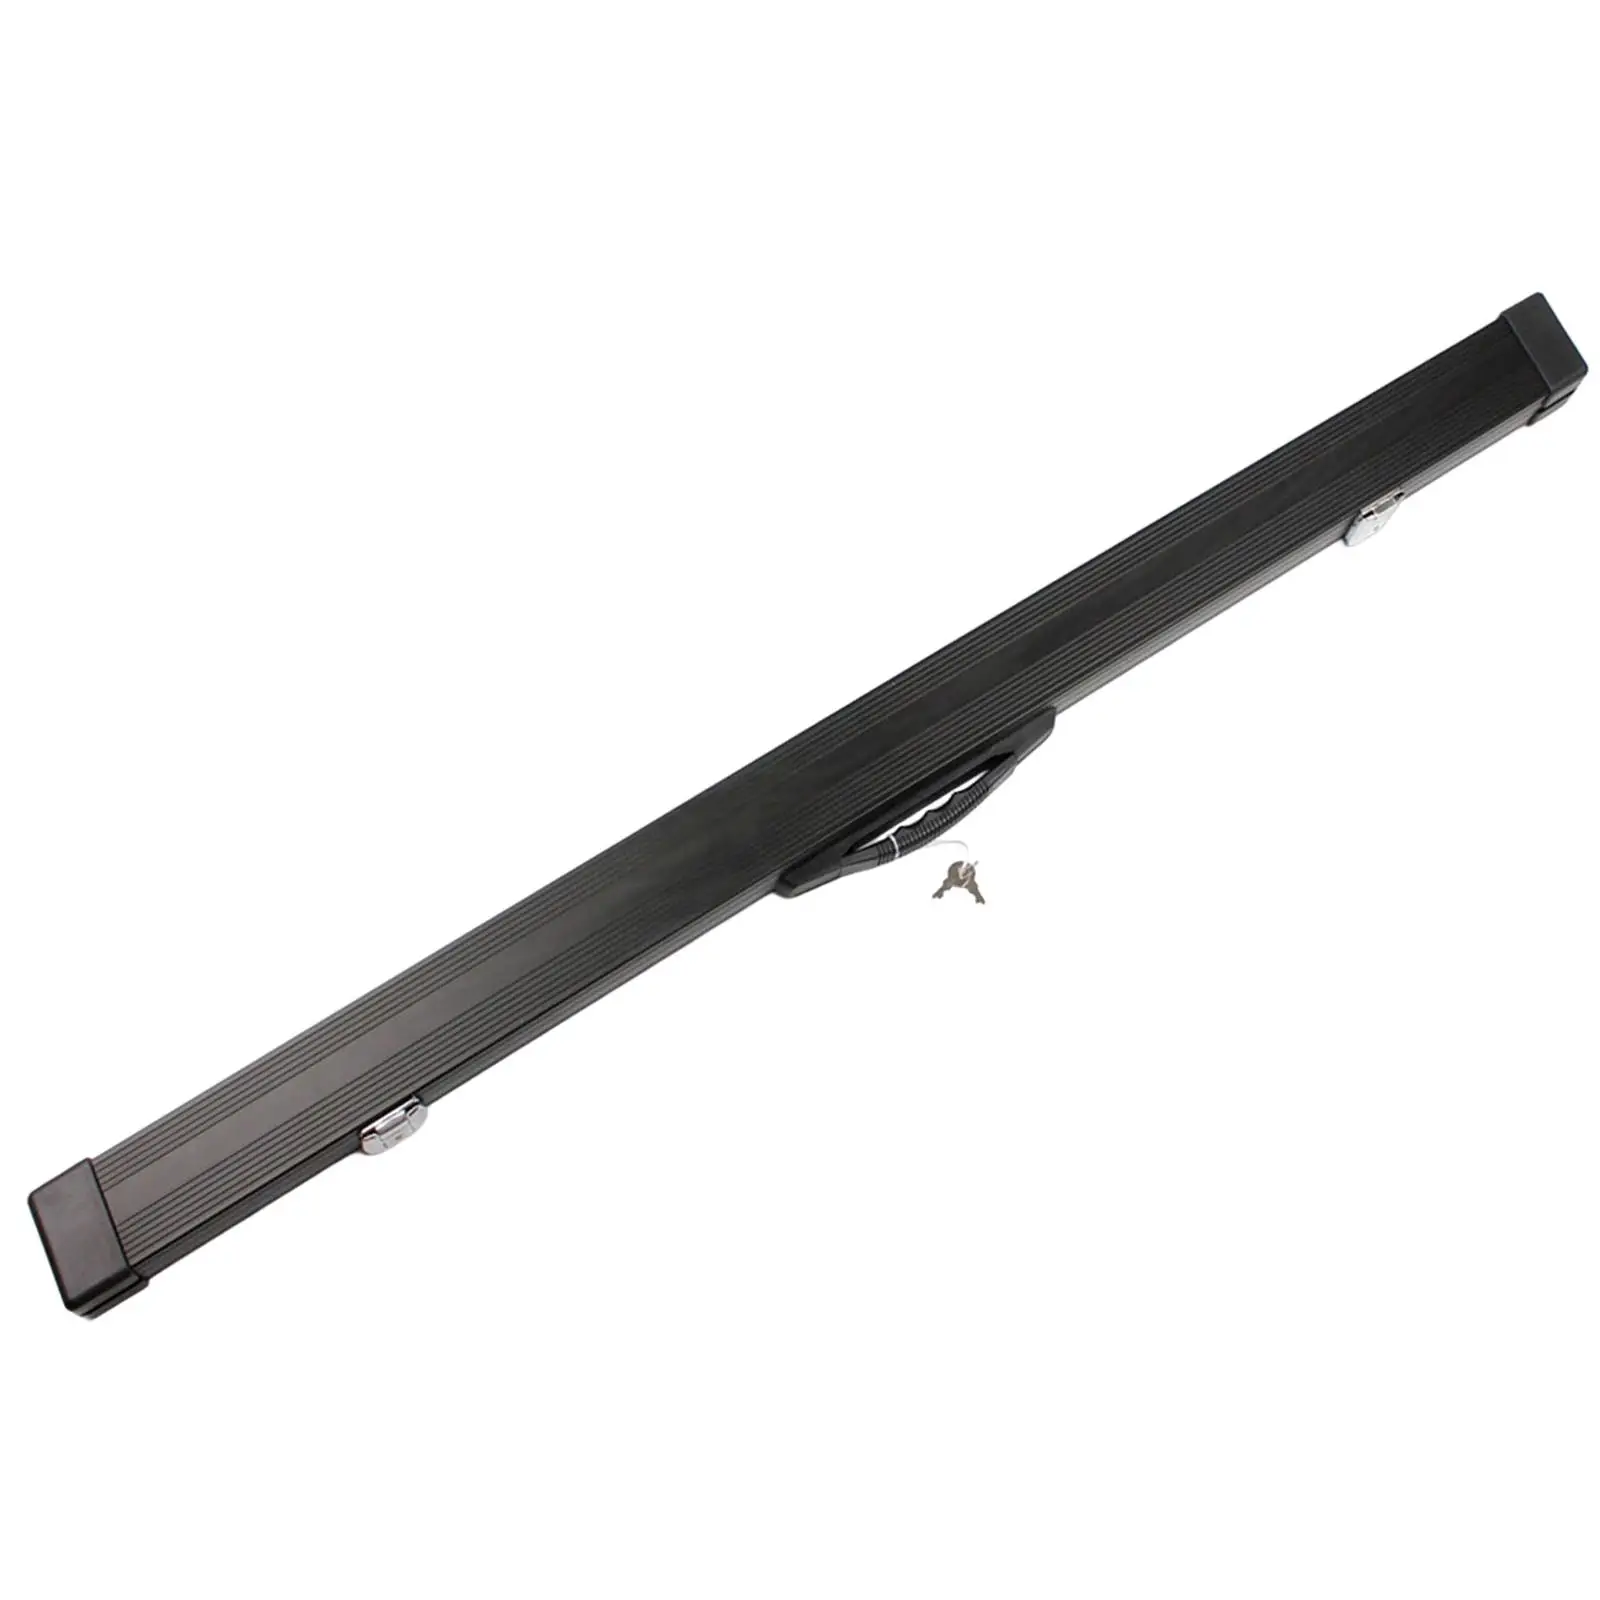 Portable Billiards Pool Cue Hard Case with Handle and Lock Heavy Duty with Internal Divider Snooker Club Accessories